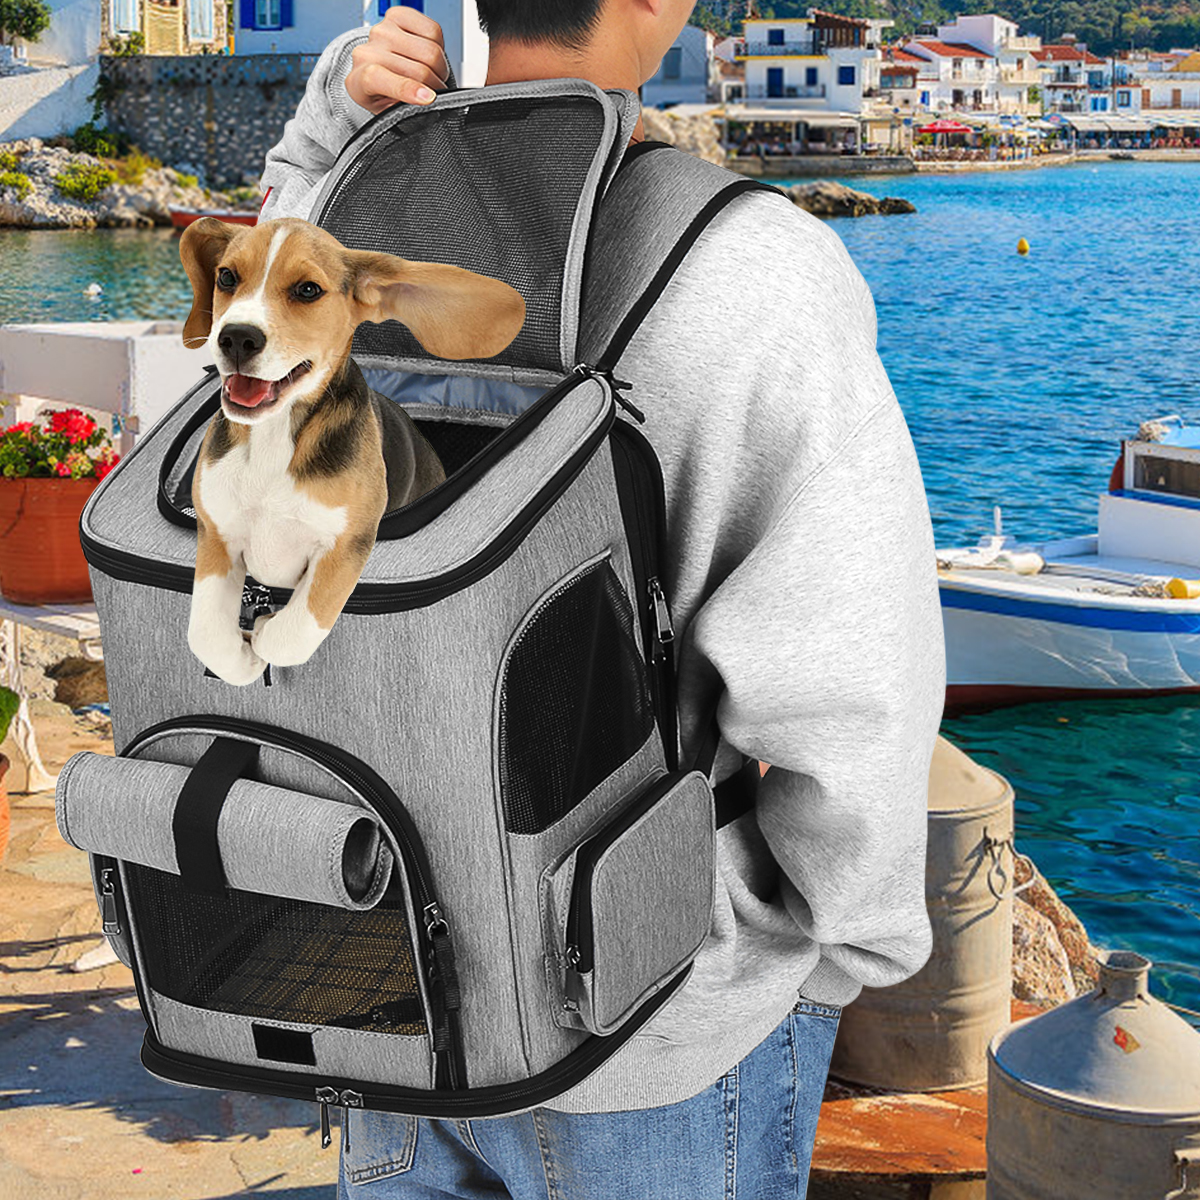 Pet-Carrier-Backpack-Breathable-Puppy-Travel-Space-Shoulder-Bag-Dog-Cat-Outdoor-Double-sided-cushion-1925739-13